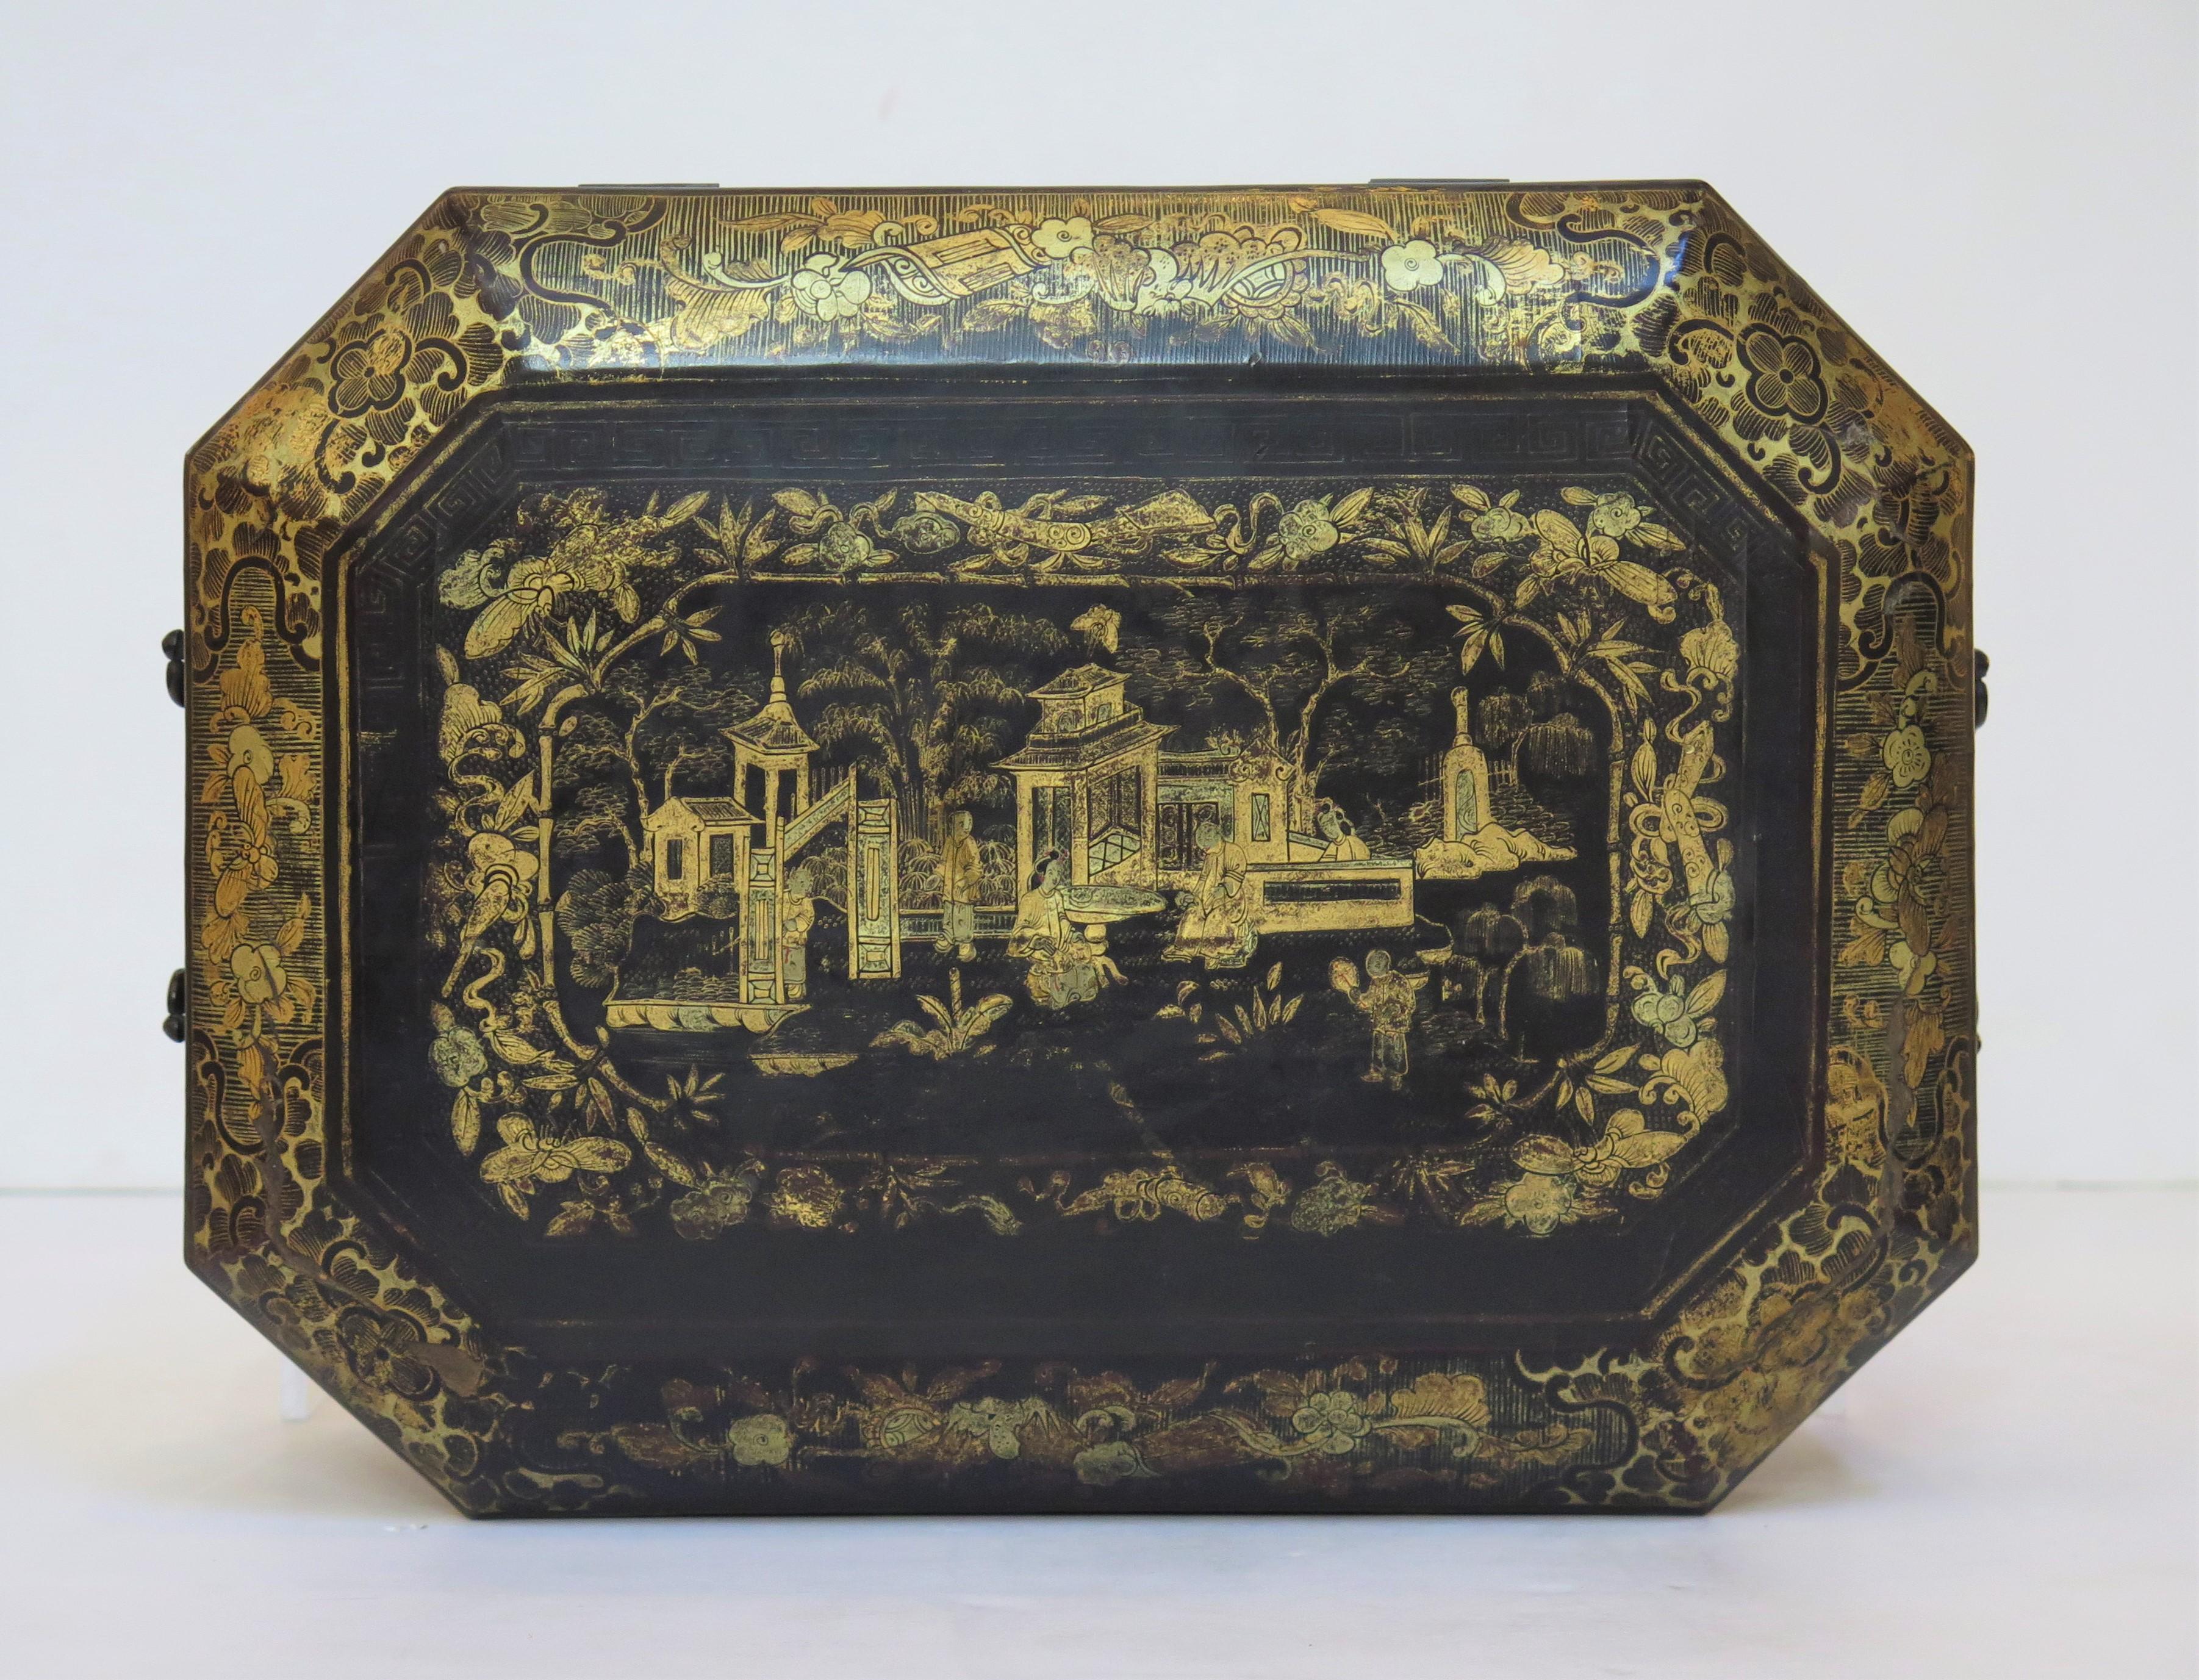 Ealy 19th Century Chinese Export Lacquer Sewing Box For Sale 11